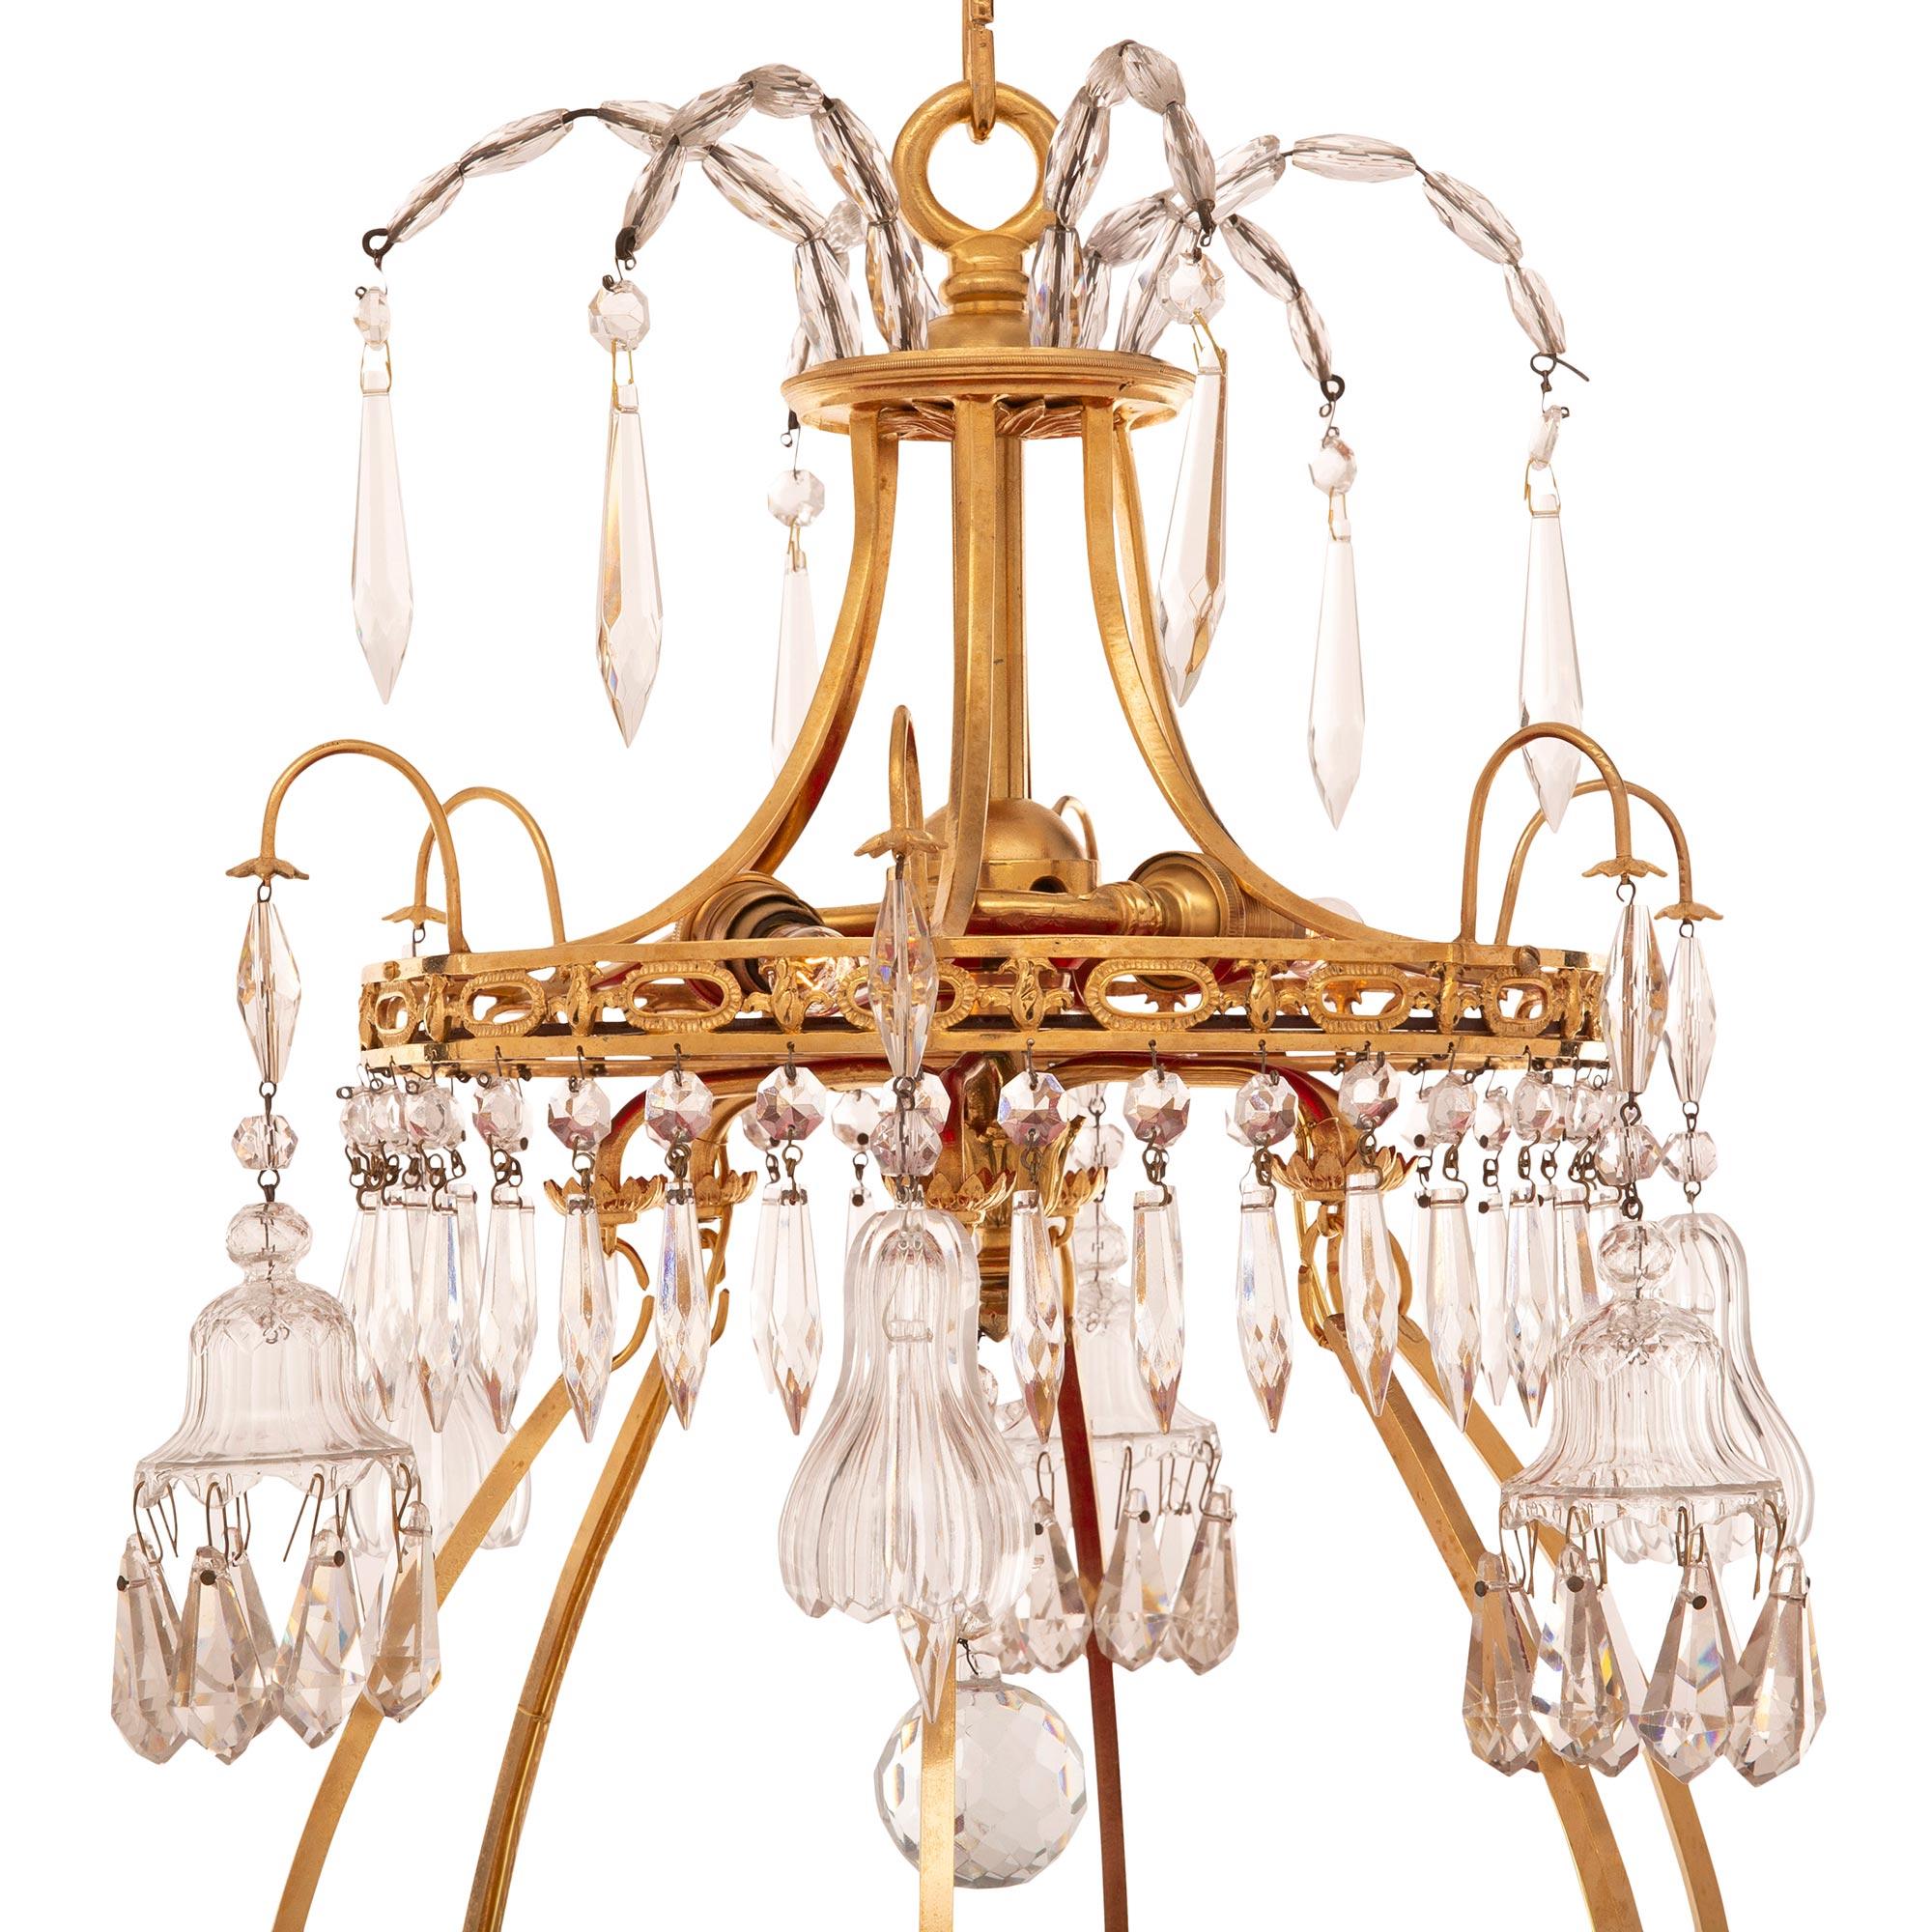 A stunning and extremely decorative Baltic 19th century Neo-Classical st. ormolu, crystal, and red glass chandelier. The six arm, nine light chandelier displays a striking circular fitted red glass pane with a superb central spray framed within a